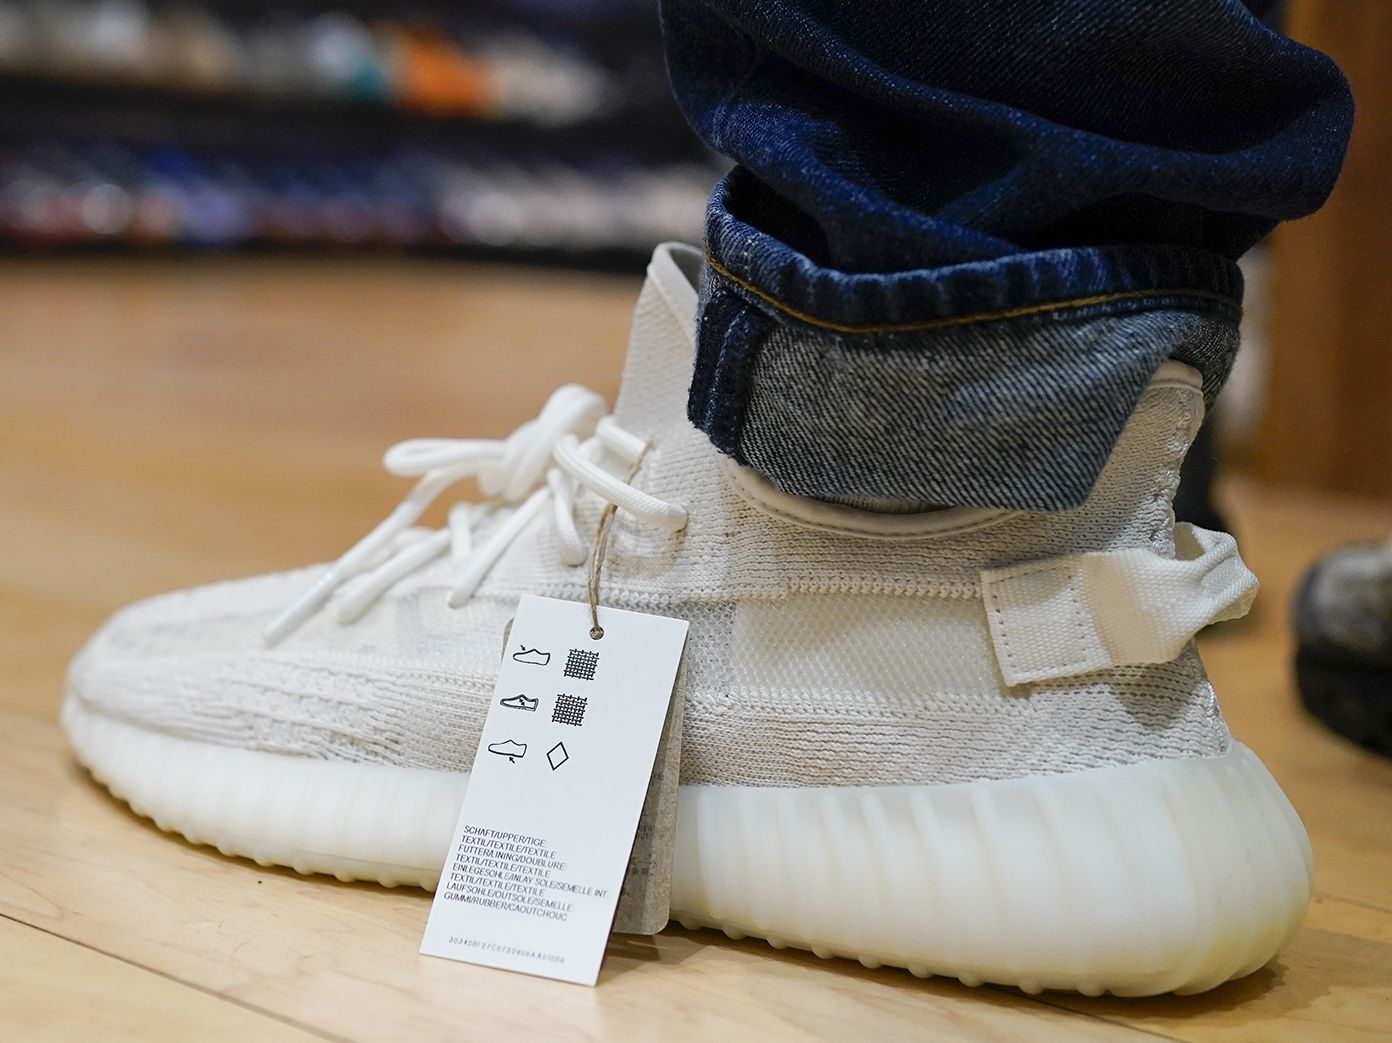 Adidas will continue to Kanye West's shoe designs without the name | CNN Business